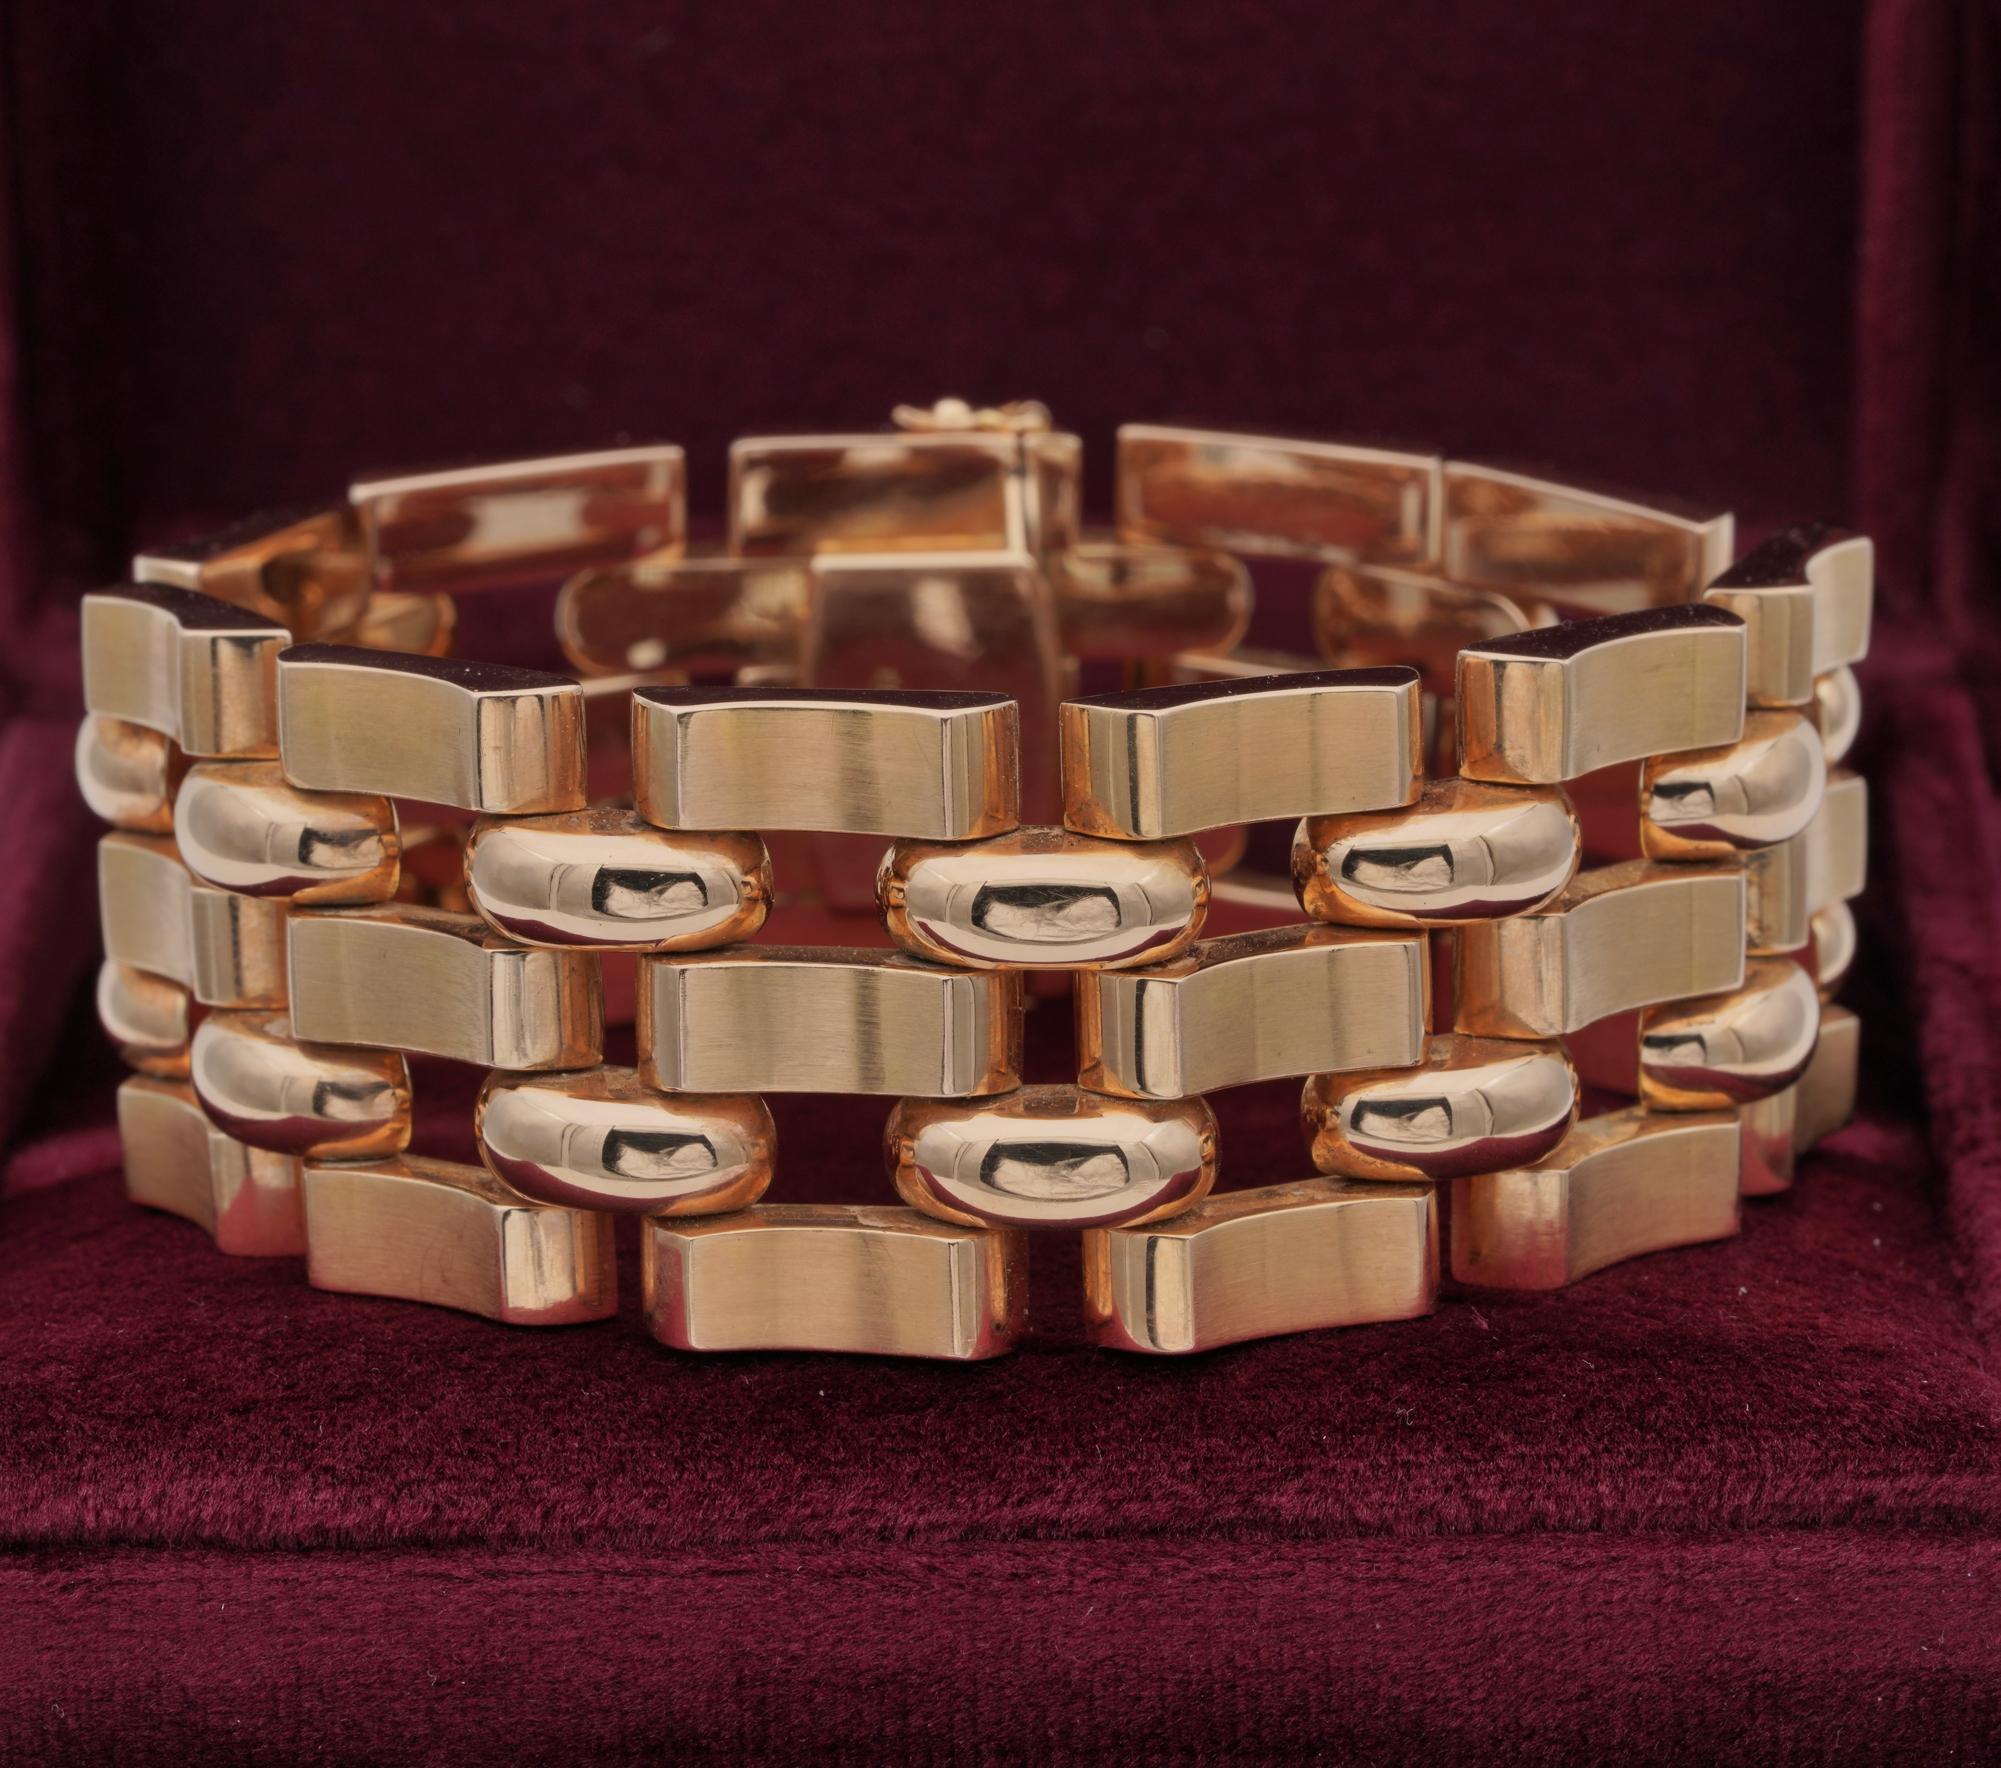 Retro Classy Statement

Classy statement jewellery from the retro era, outstanding, large, bold Tank design so distinctive of that era
Italian origin, 1940/50
Beautiful made of solid 18 KT rose solid gold , massive weight of 64.6 grams bears Italian